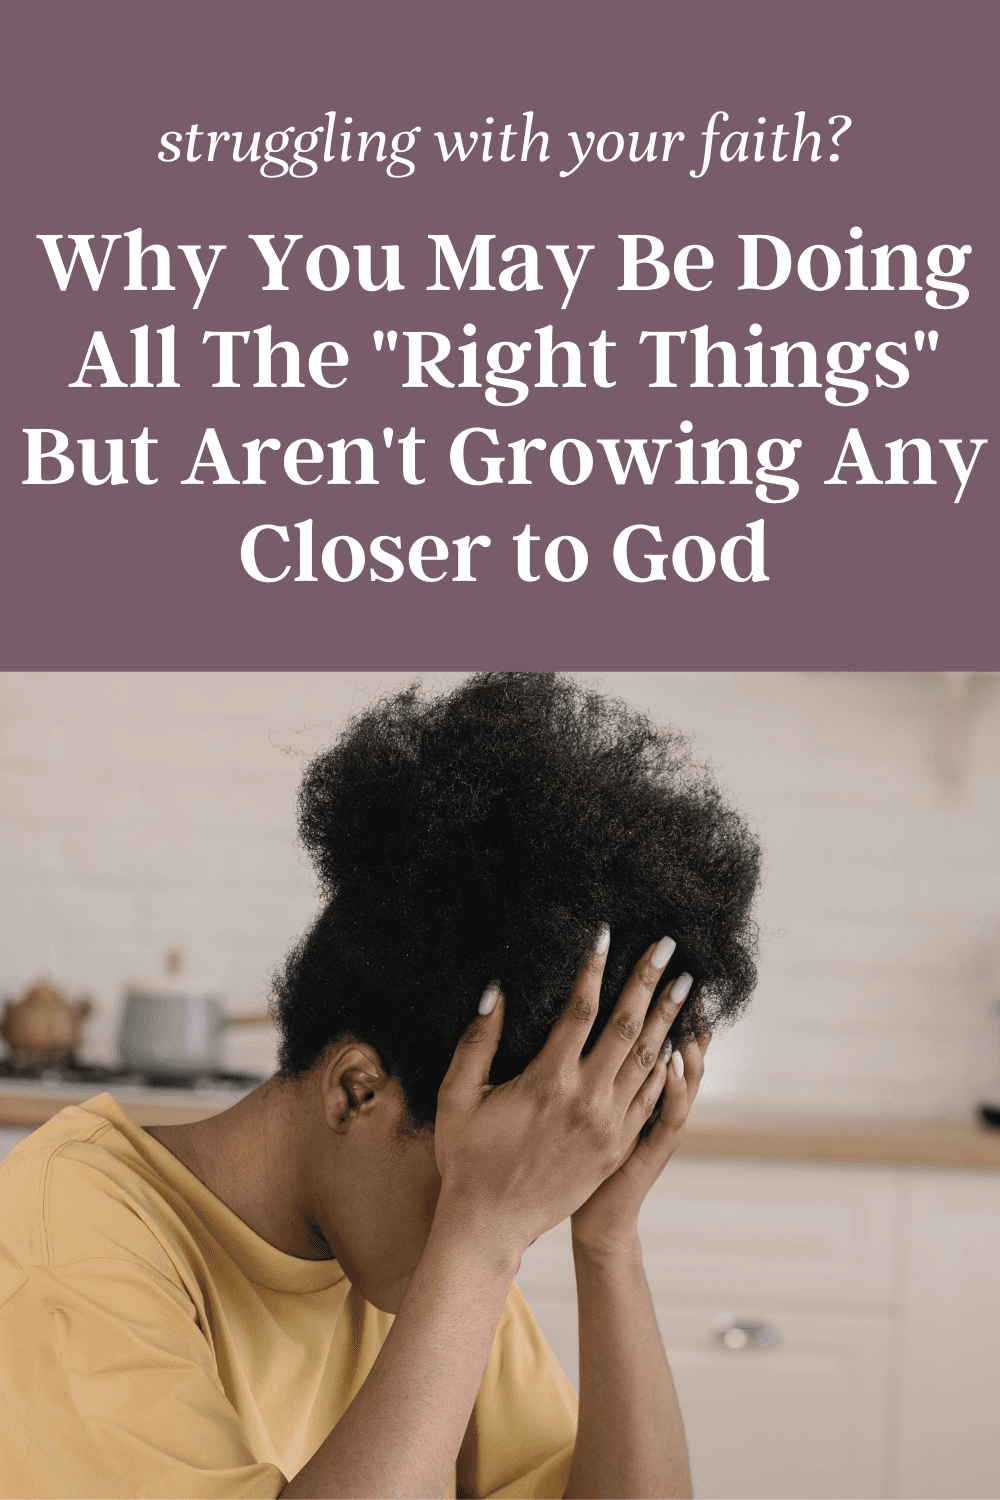 As an introverted Christian woman it can be hard to grow closer to God? Learn the real reason that all the "right things" aren't working for you - plus, tips about how to strengthen your faith as an HSP or highly sensitive introverted Christian woman. via @womenfindinggod